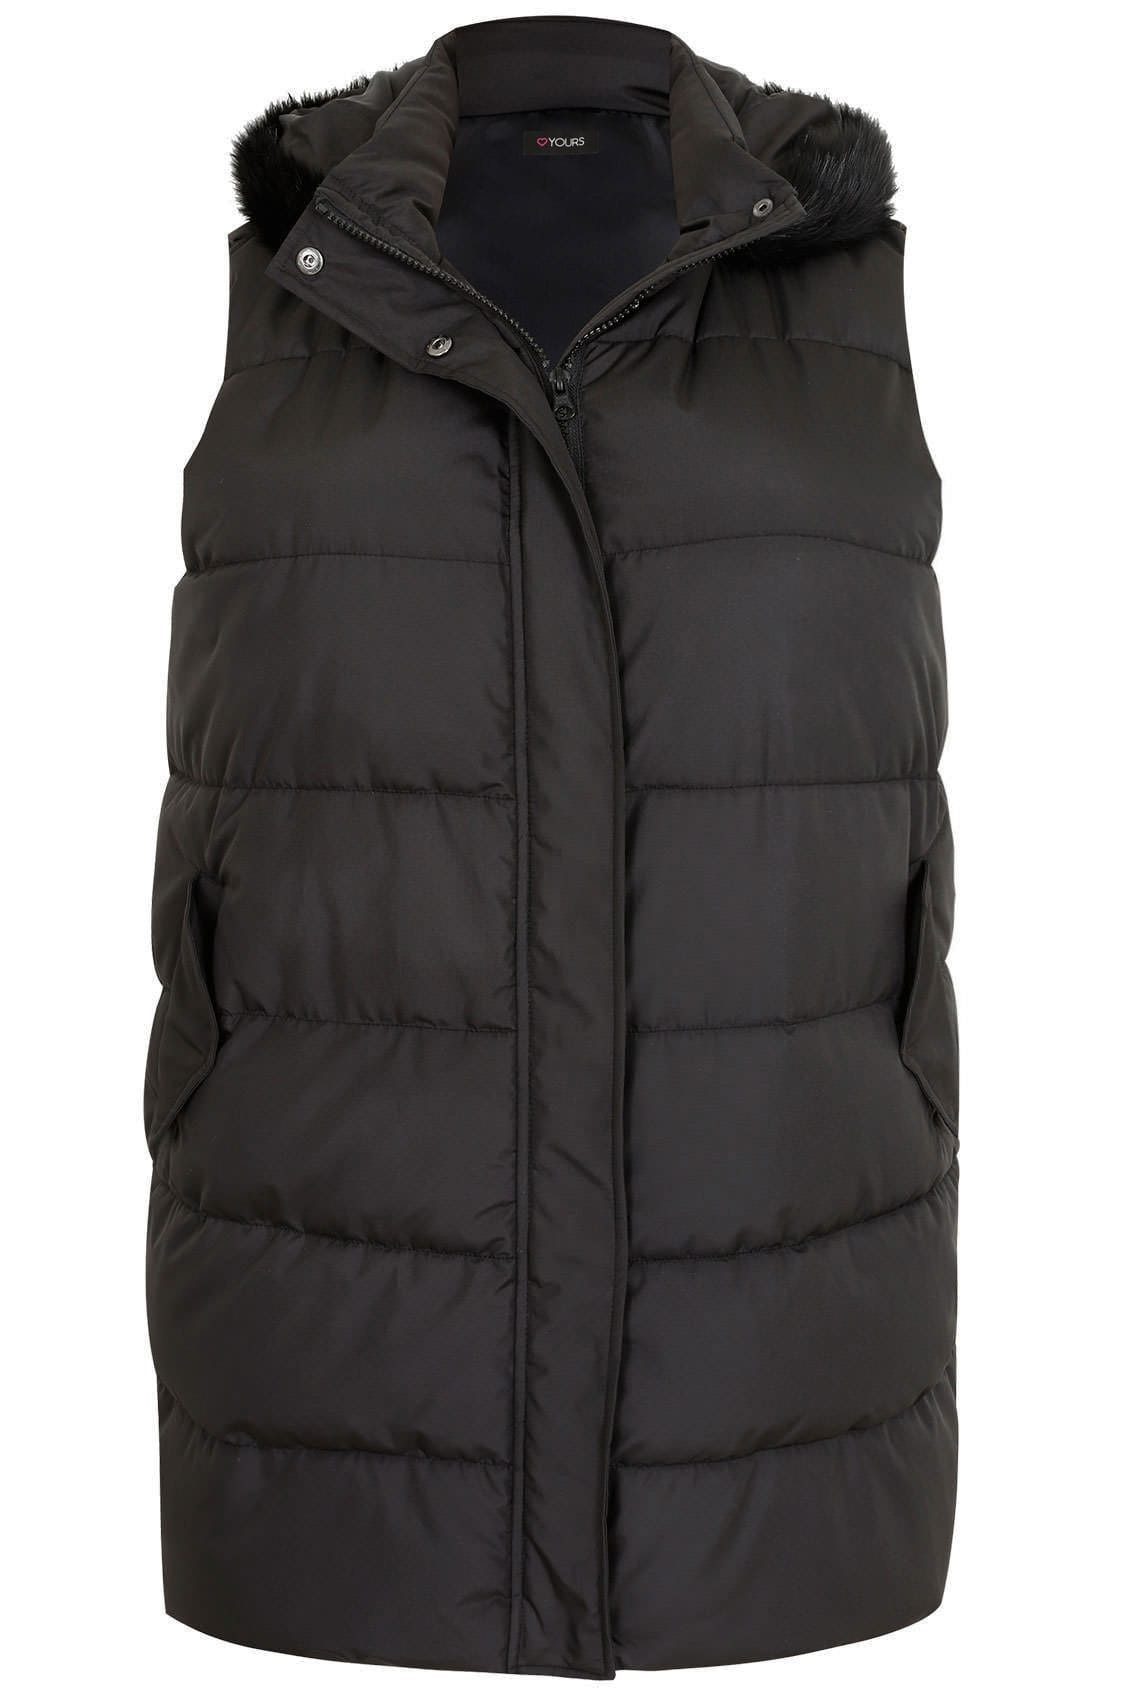 Black Longline Padded Gilet With Faux Fur Trim Hood, Plus size 16 to 36